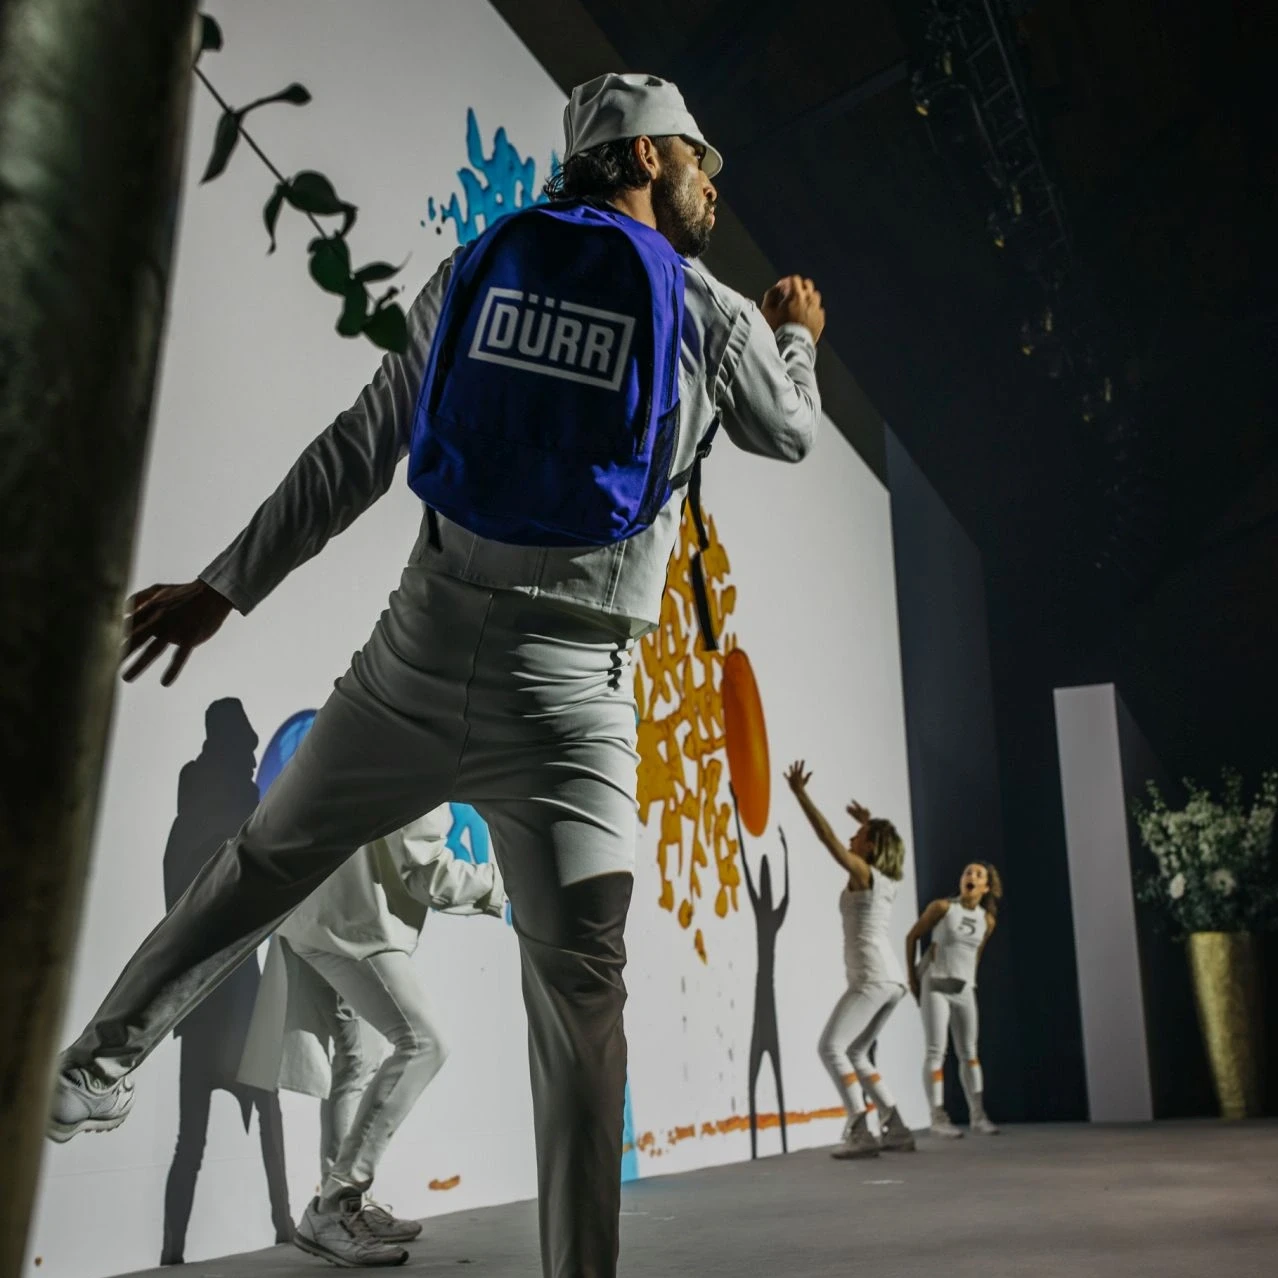 Dancer with Dürr backpack on stage